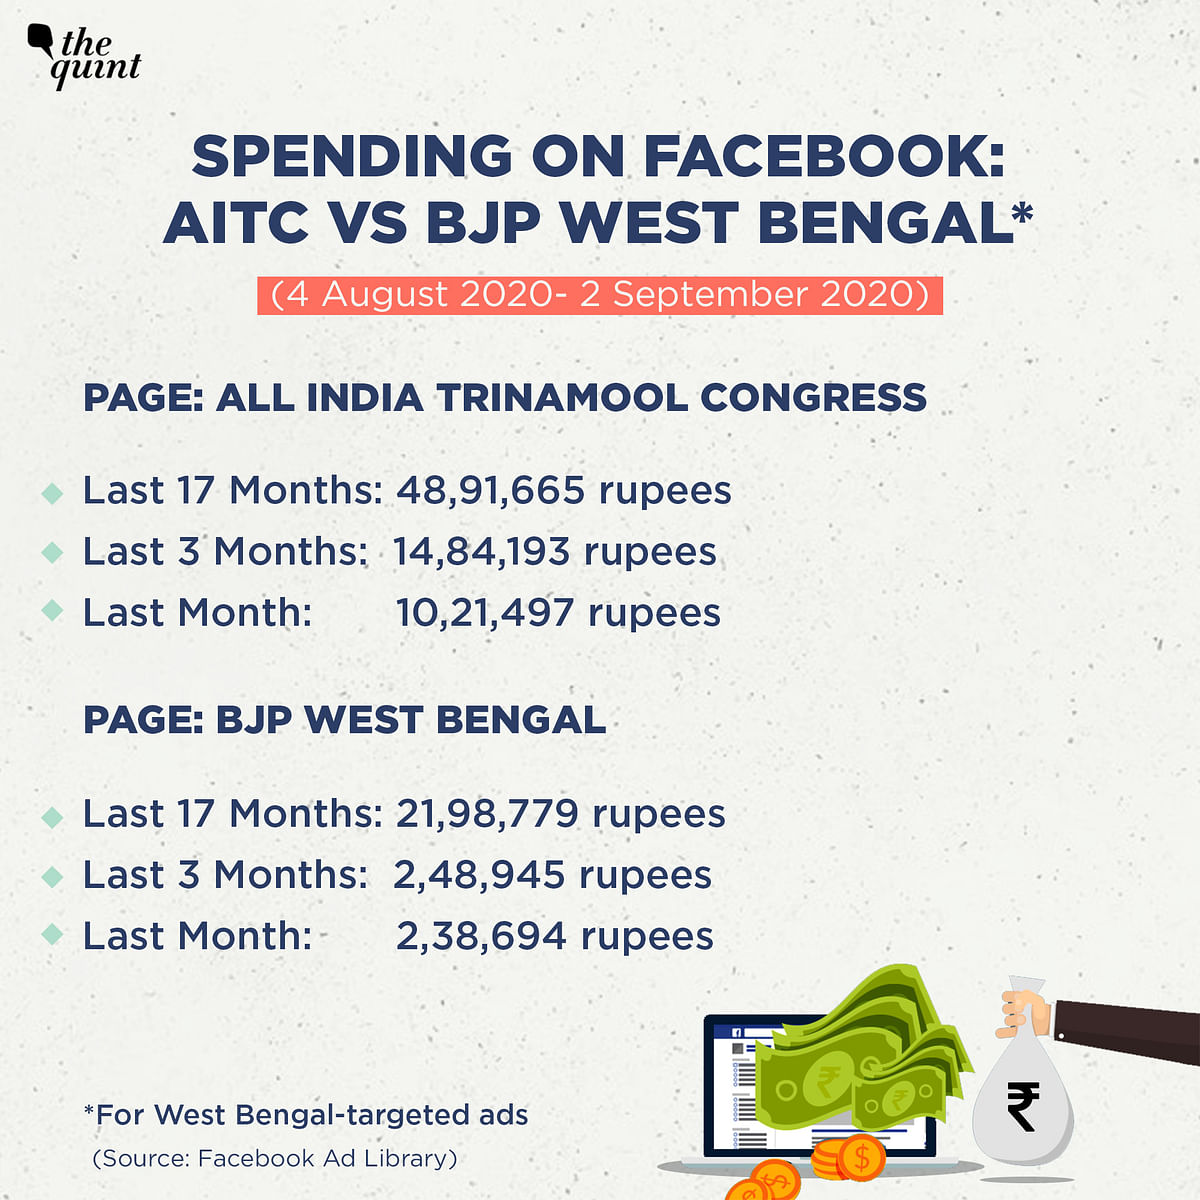 Of the 10 top spenders in West Bengal, 5 pages are run by I-PAC, while 2 others belong to TMC leaders.